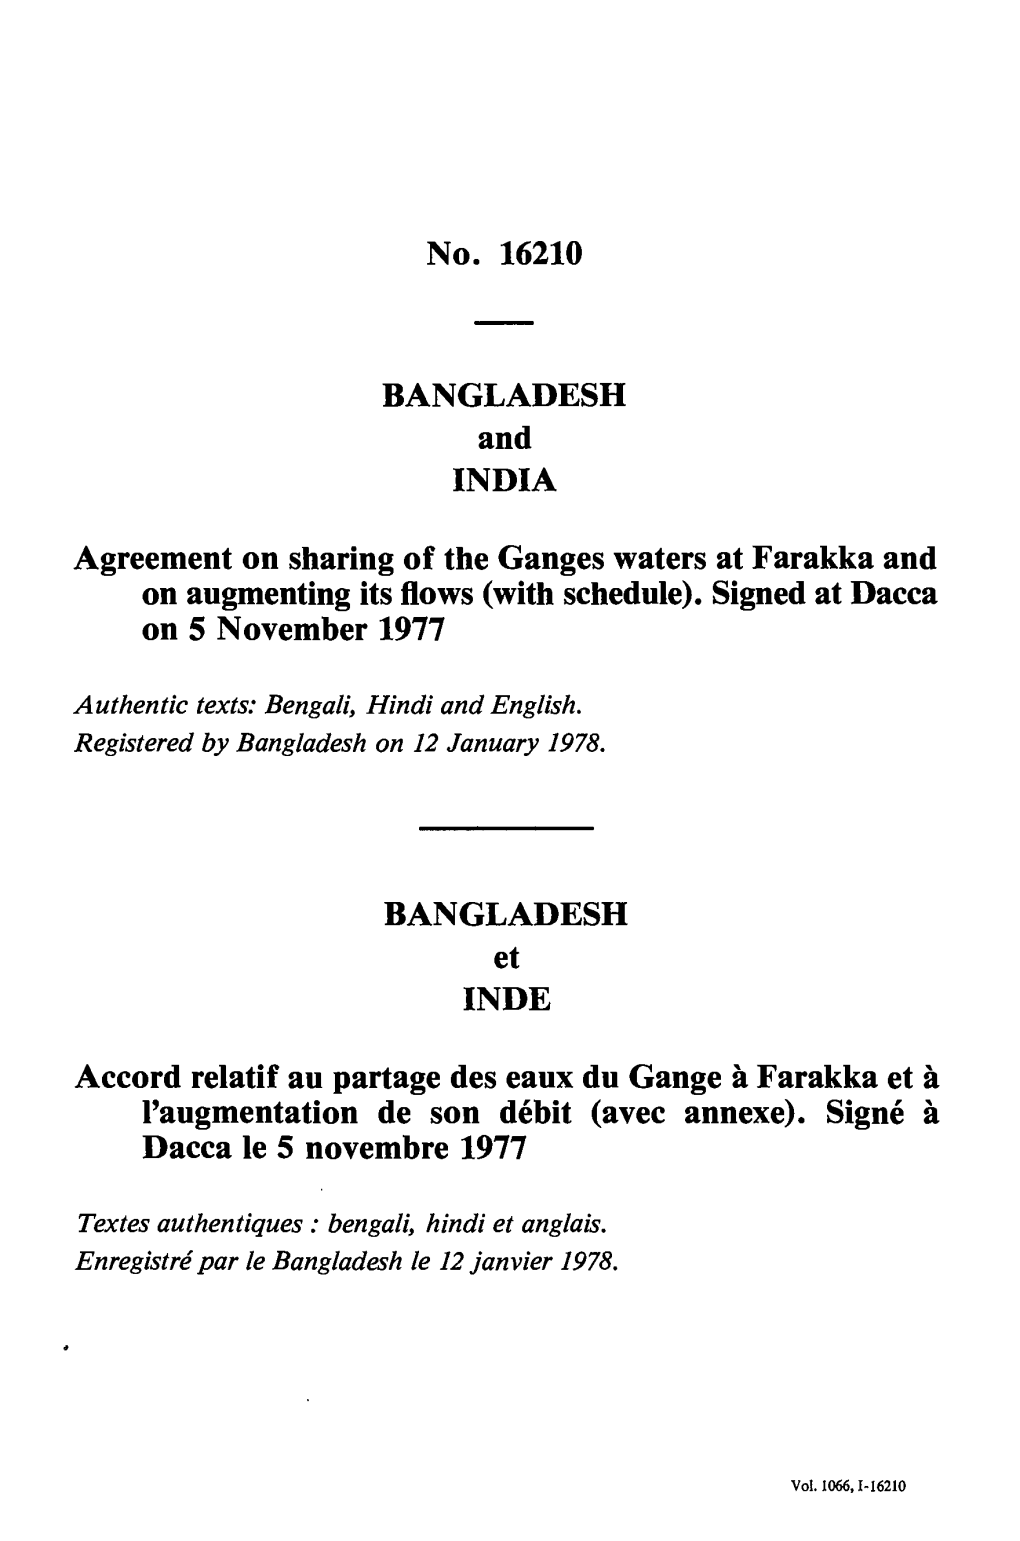 Agreement on Sharing of the Ganges Waters at Farakka and on Augmenting Its Flows (With Schedule)